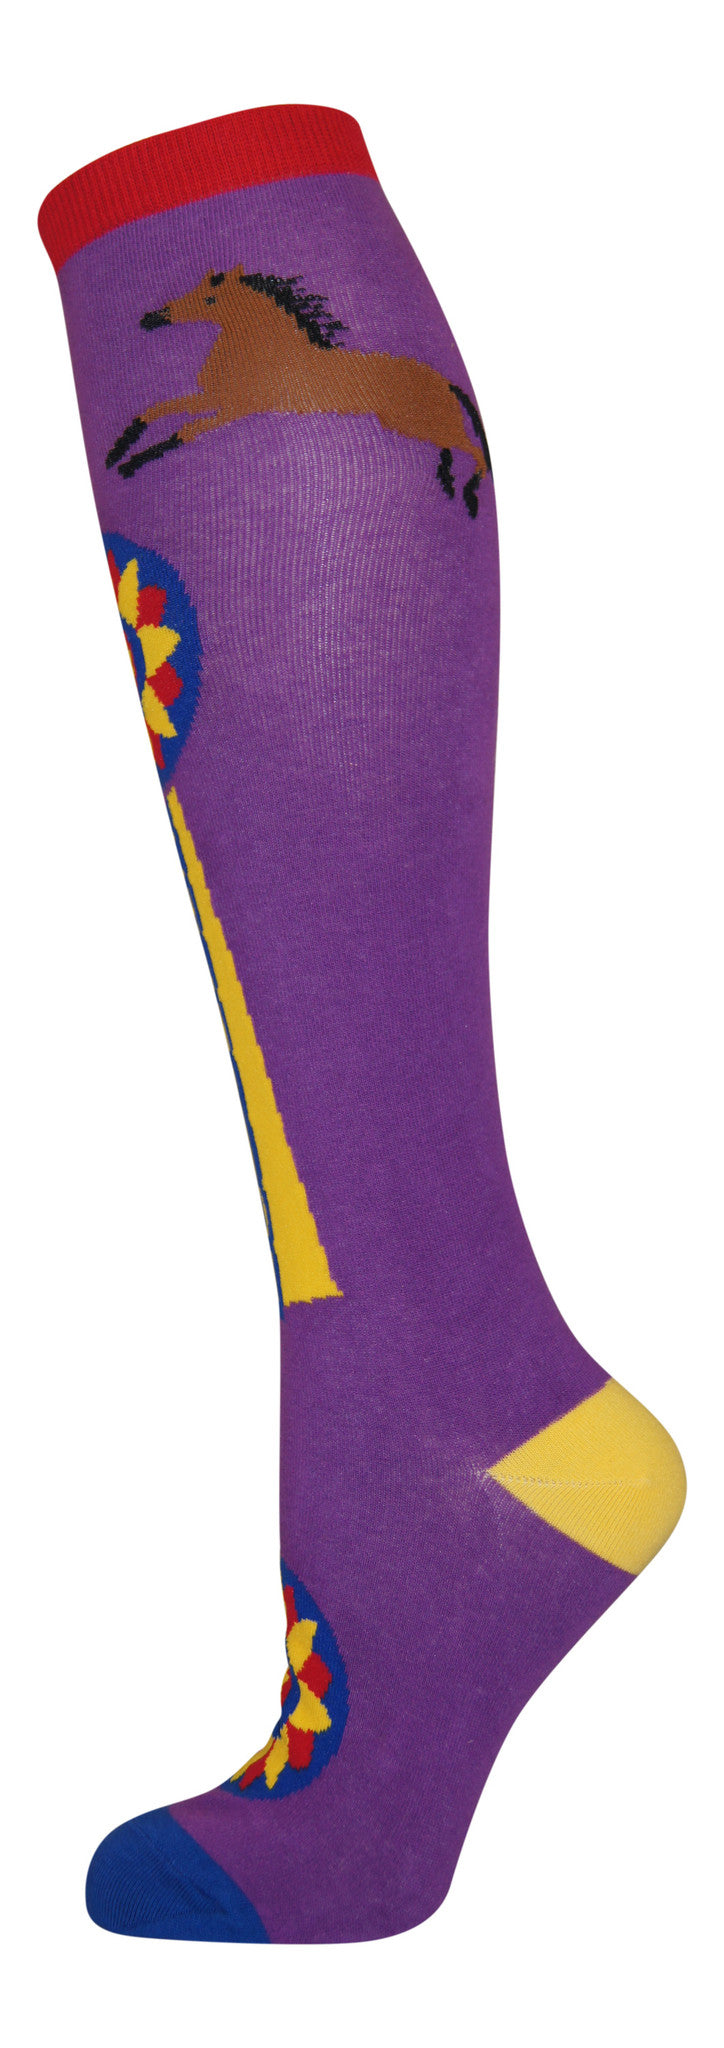 "Champion" cotton-rich knee sock from lucky7socks.com